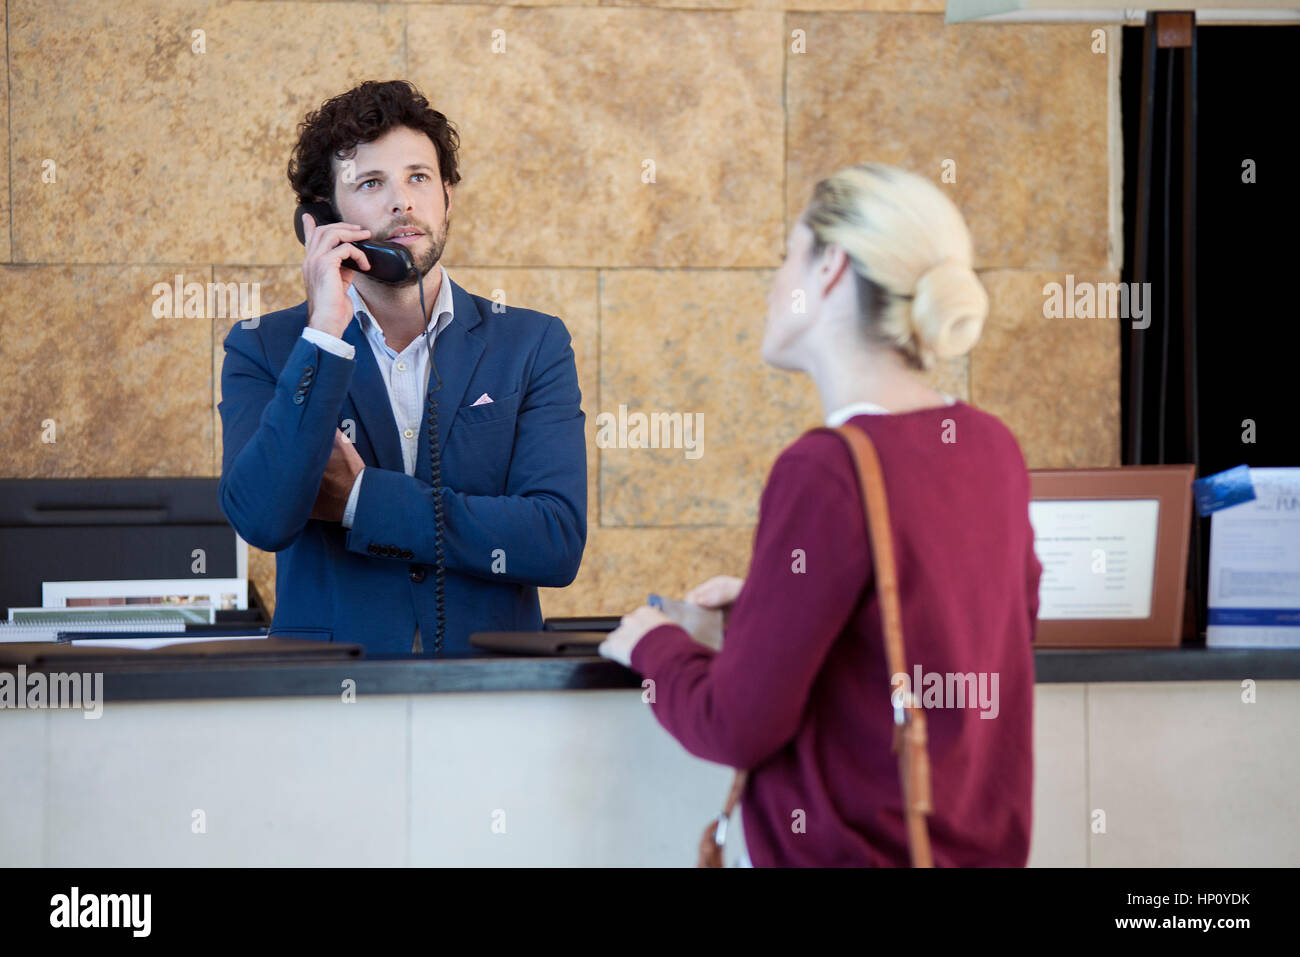 Impatient customer waiting while hotel receptionist talks on phone Stock Photo